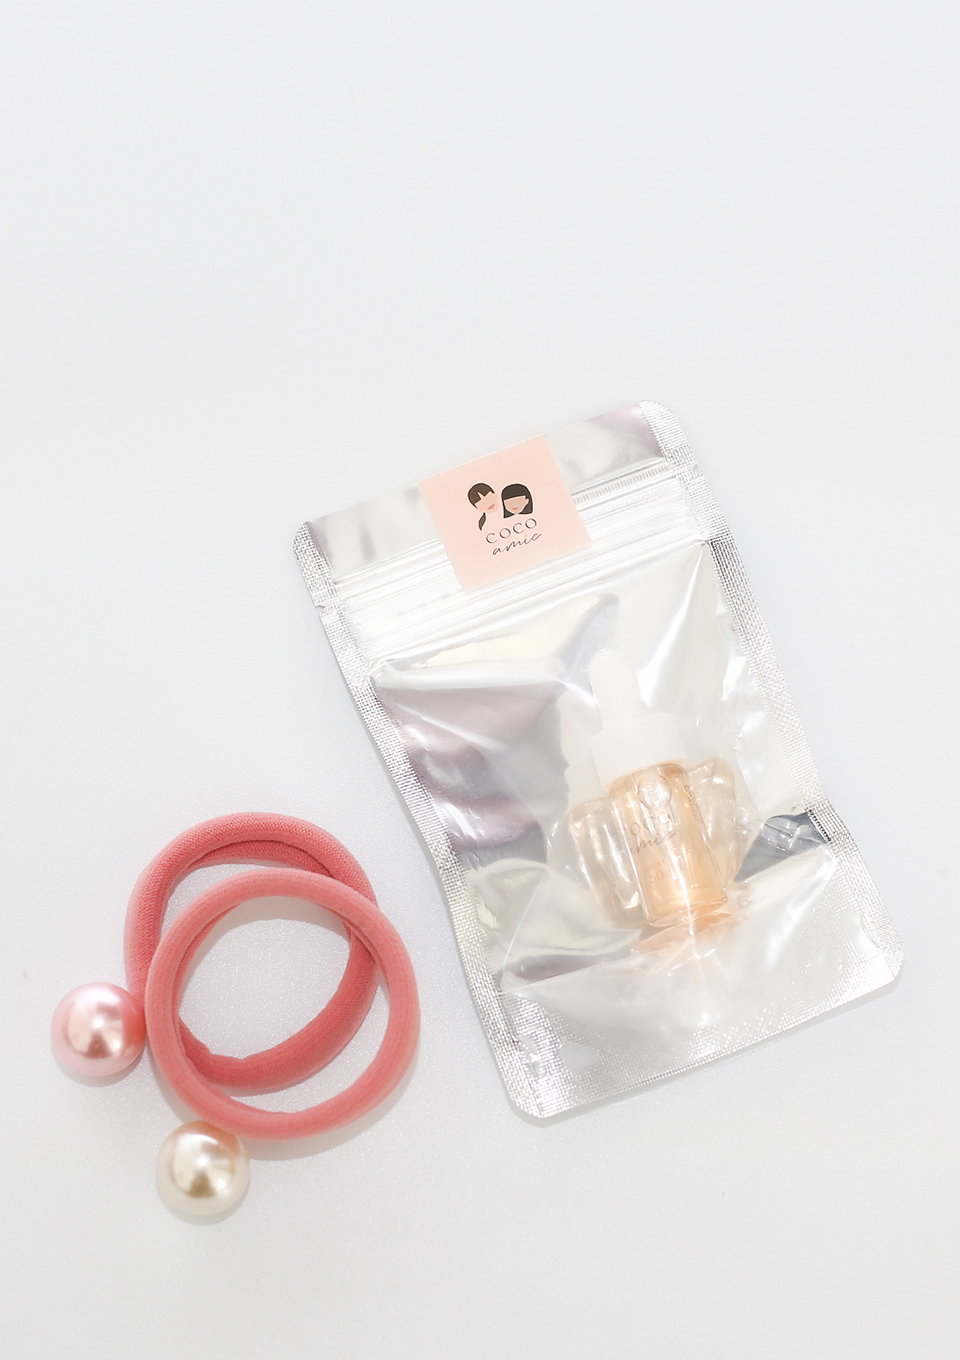 COCOamie 50 TRIAL SET(PINK)